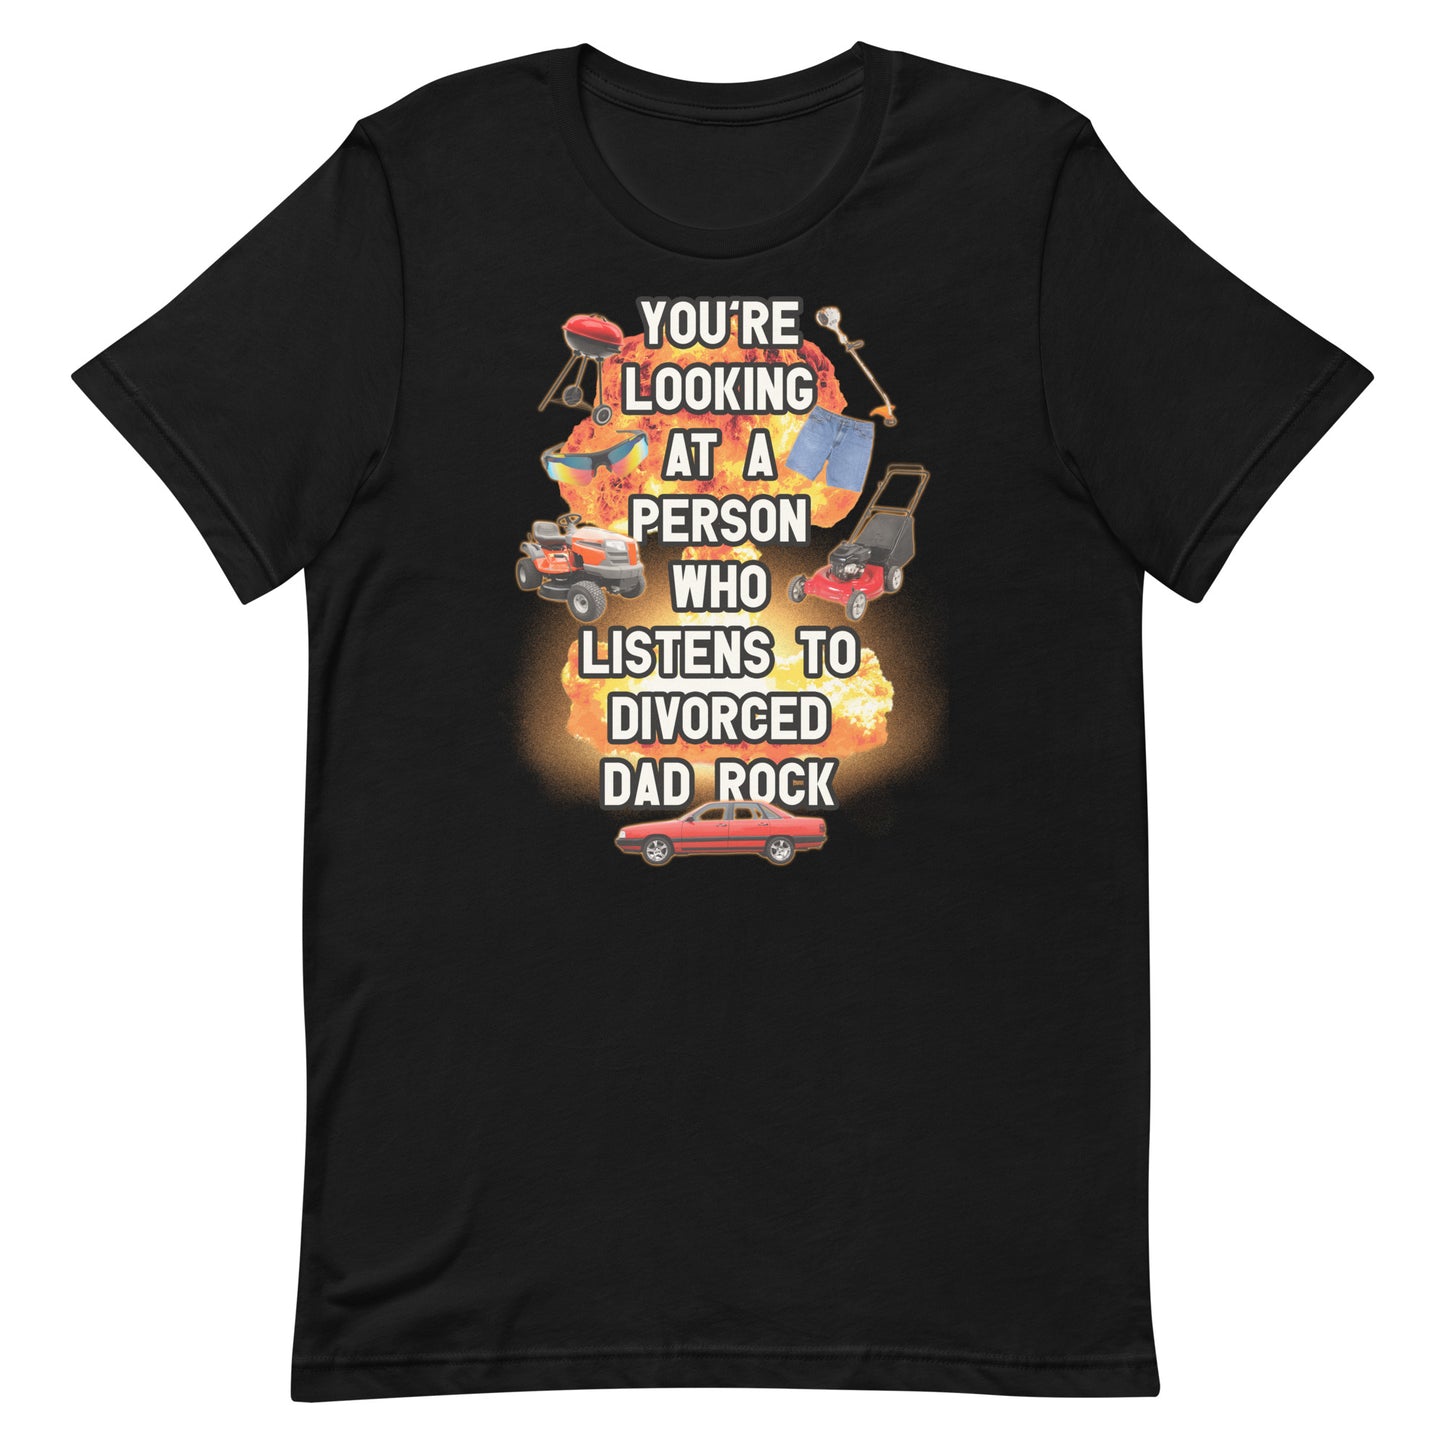 You're Looking at a Person Who Listens to Divorced Dad Rock Unisex t-shirt